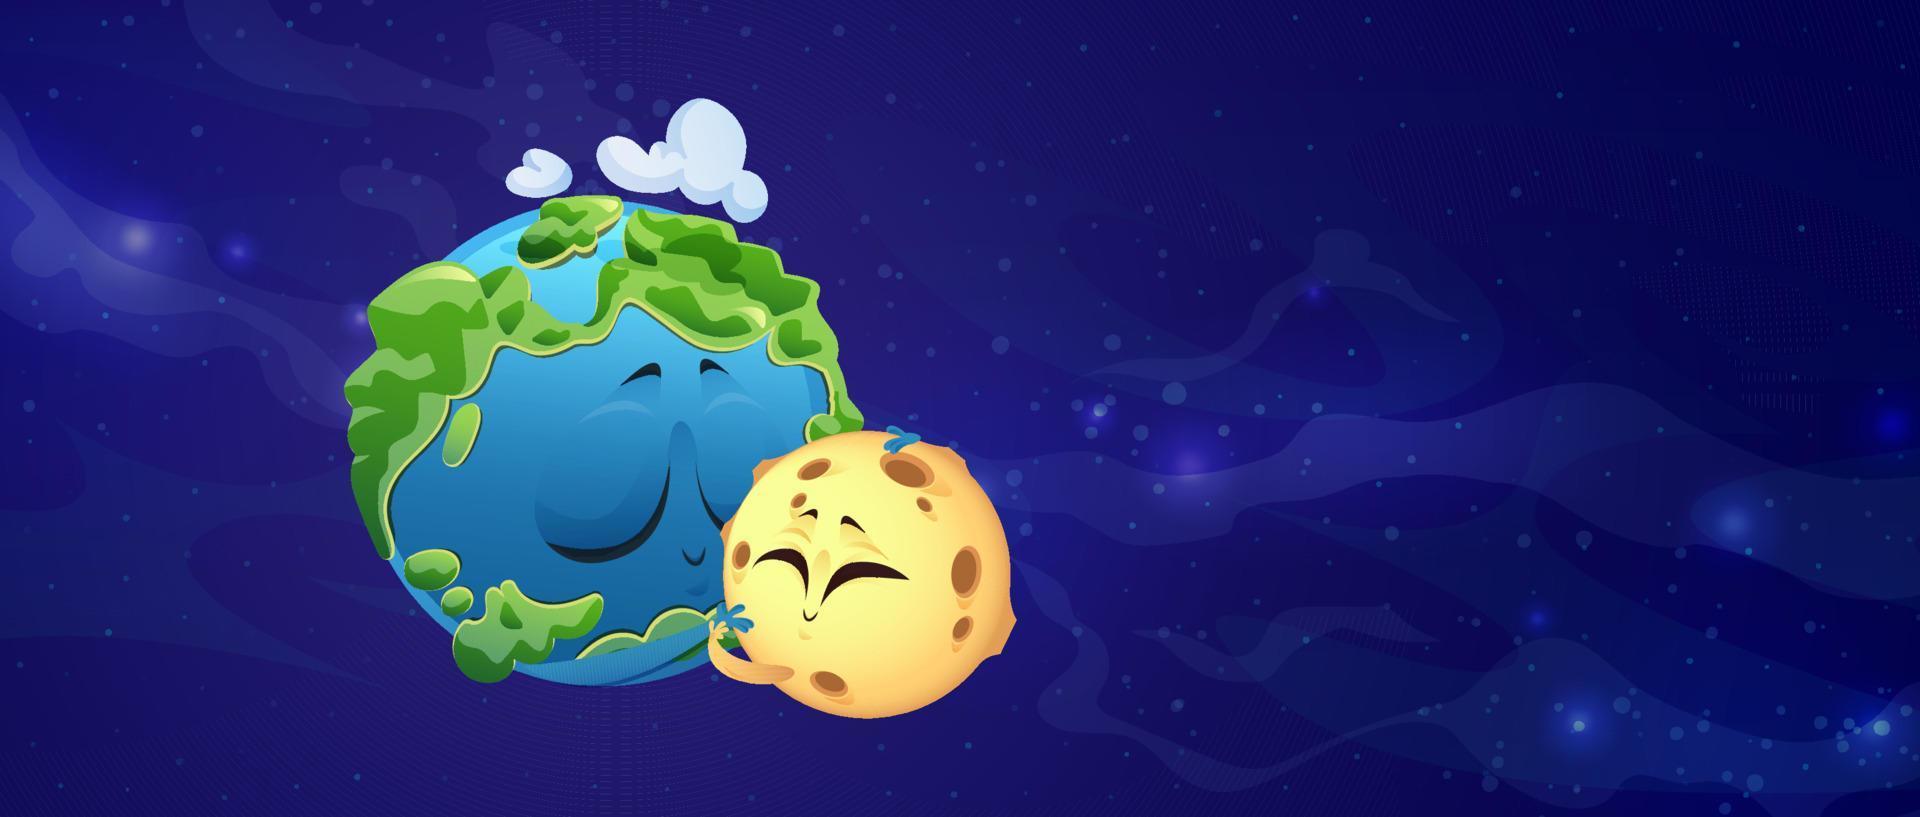 Cute planet Earth and Moon embrace in outer space vector